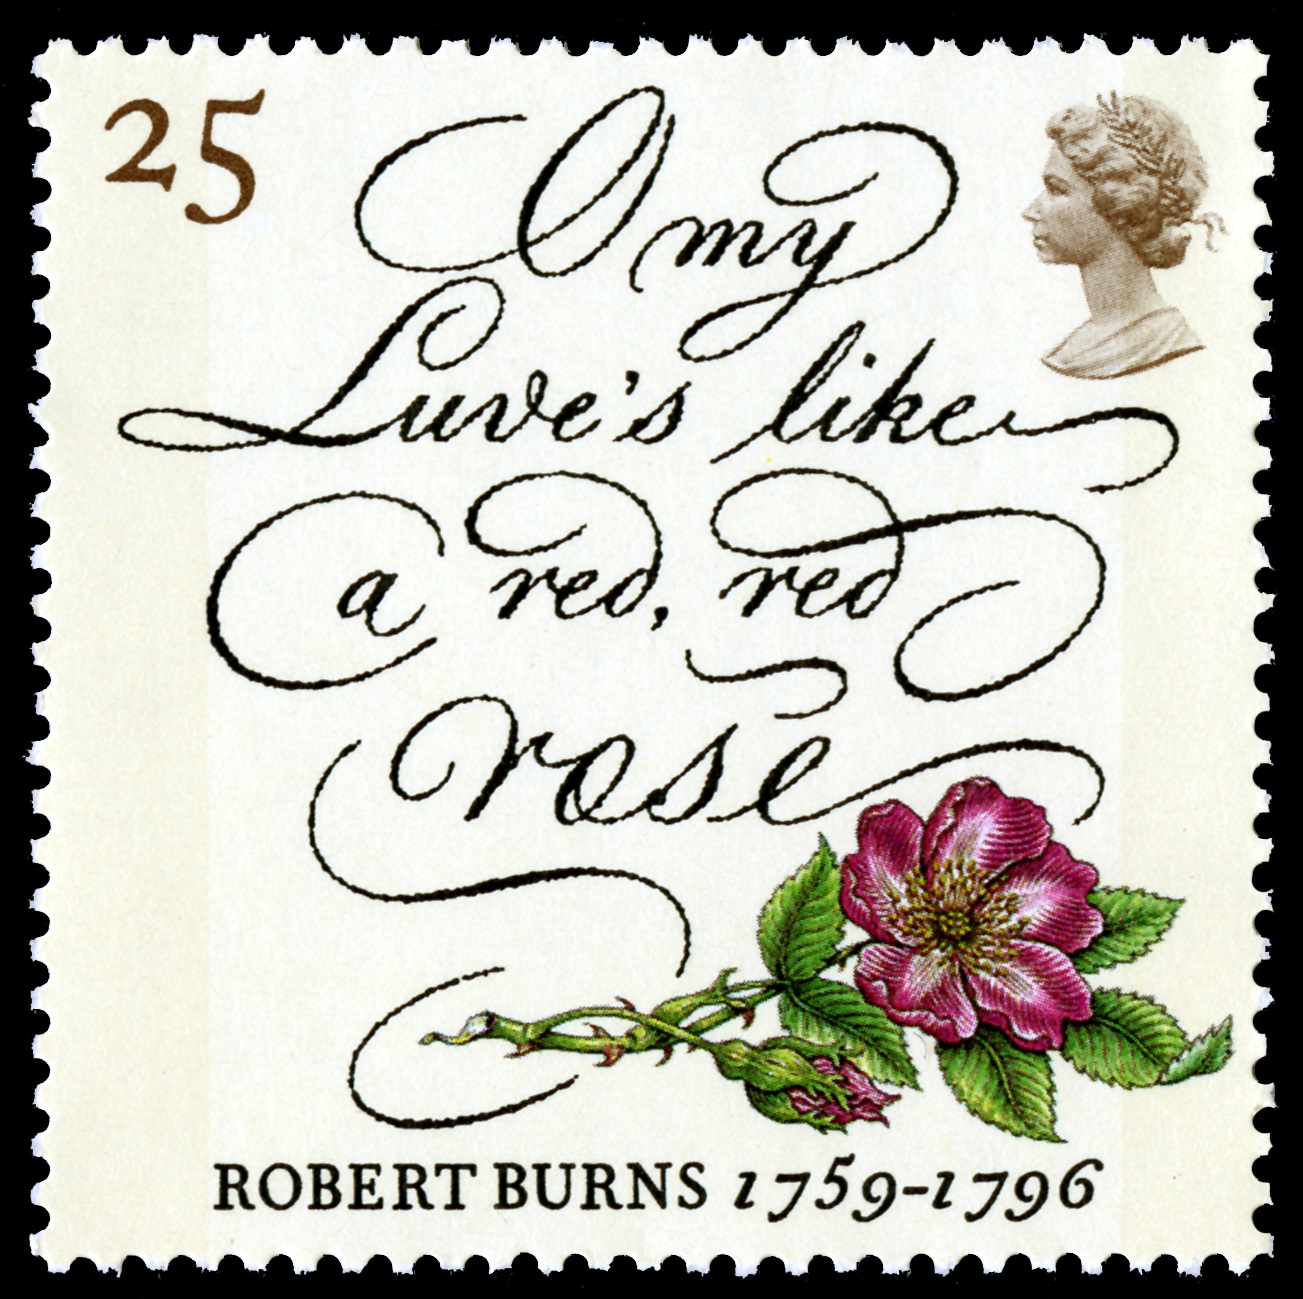 Stamp containing text from Robert Burns poem 'O my Luve's like a red red rose' with a value of 25 pence.